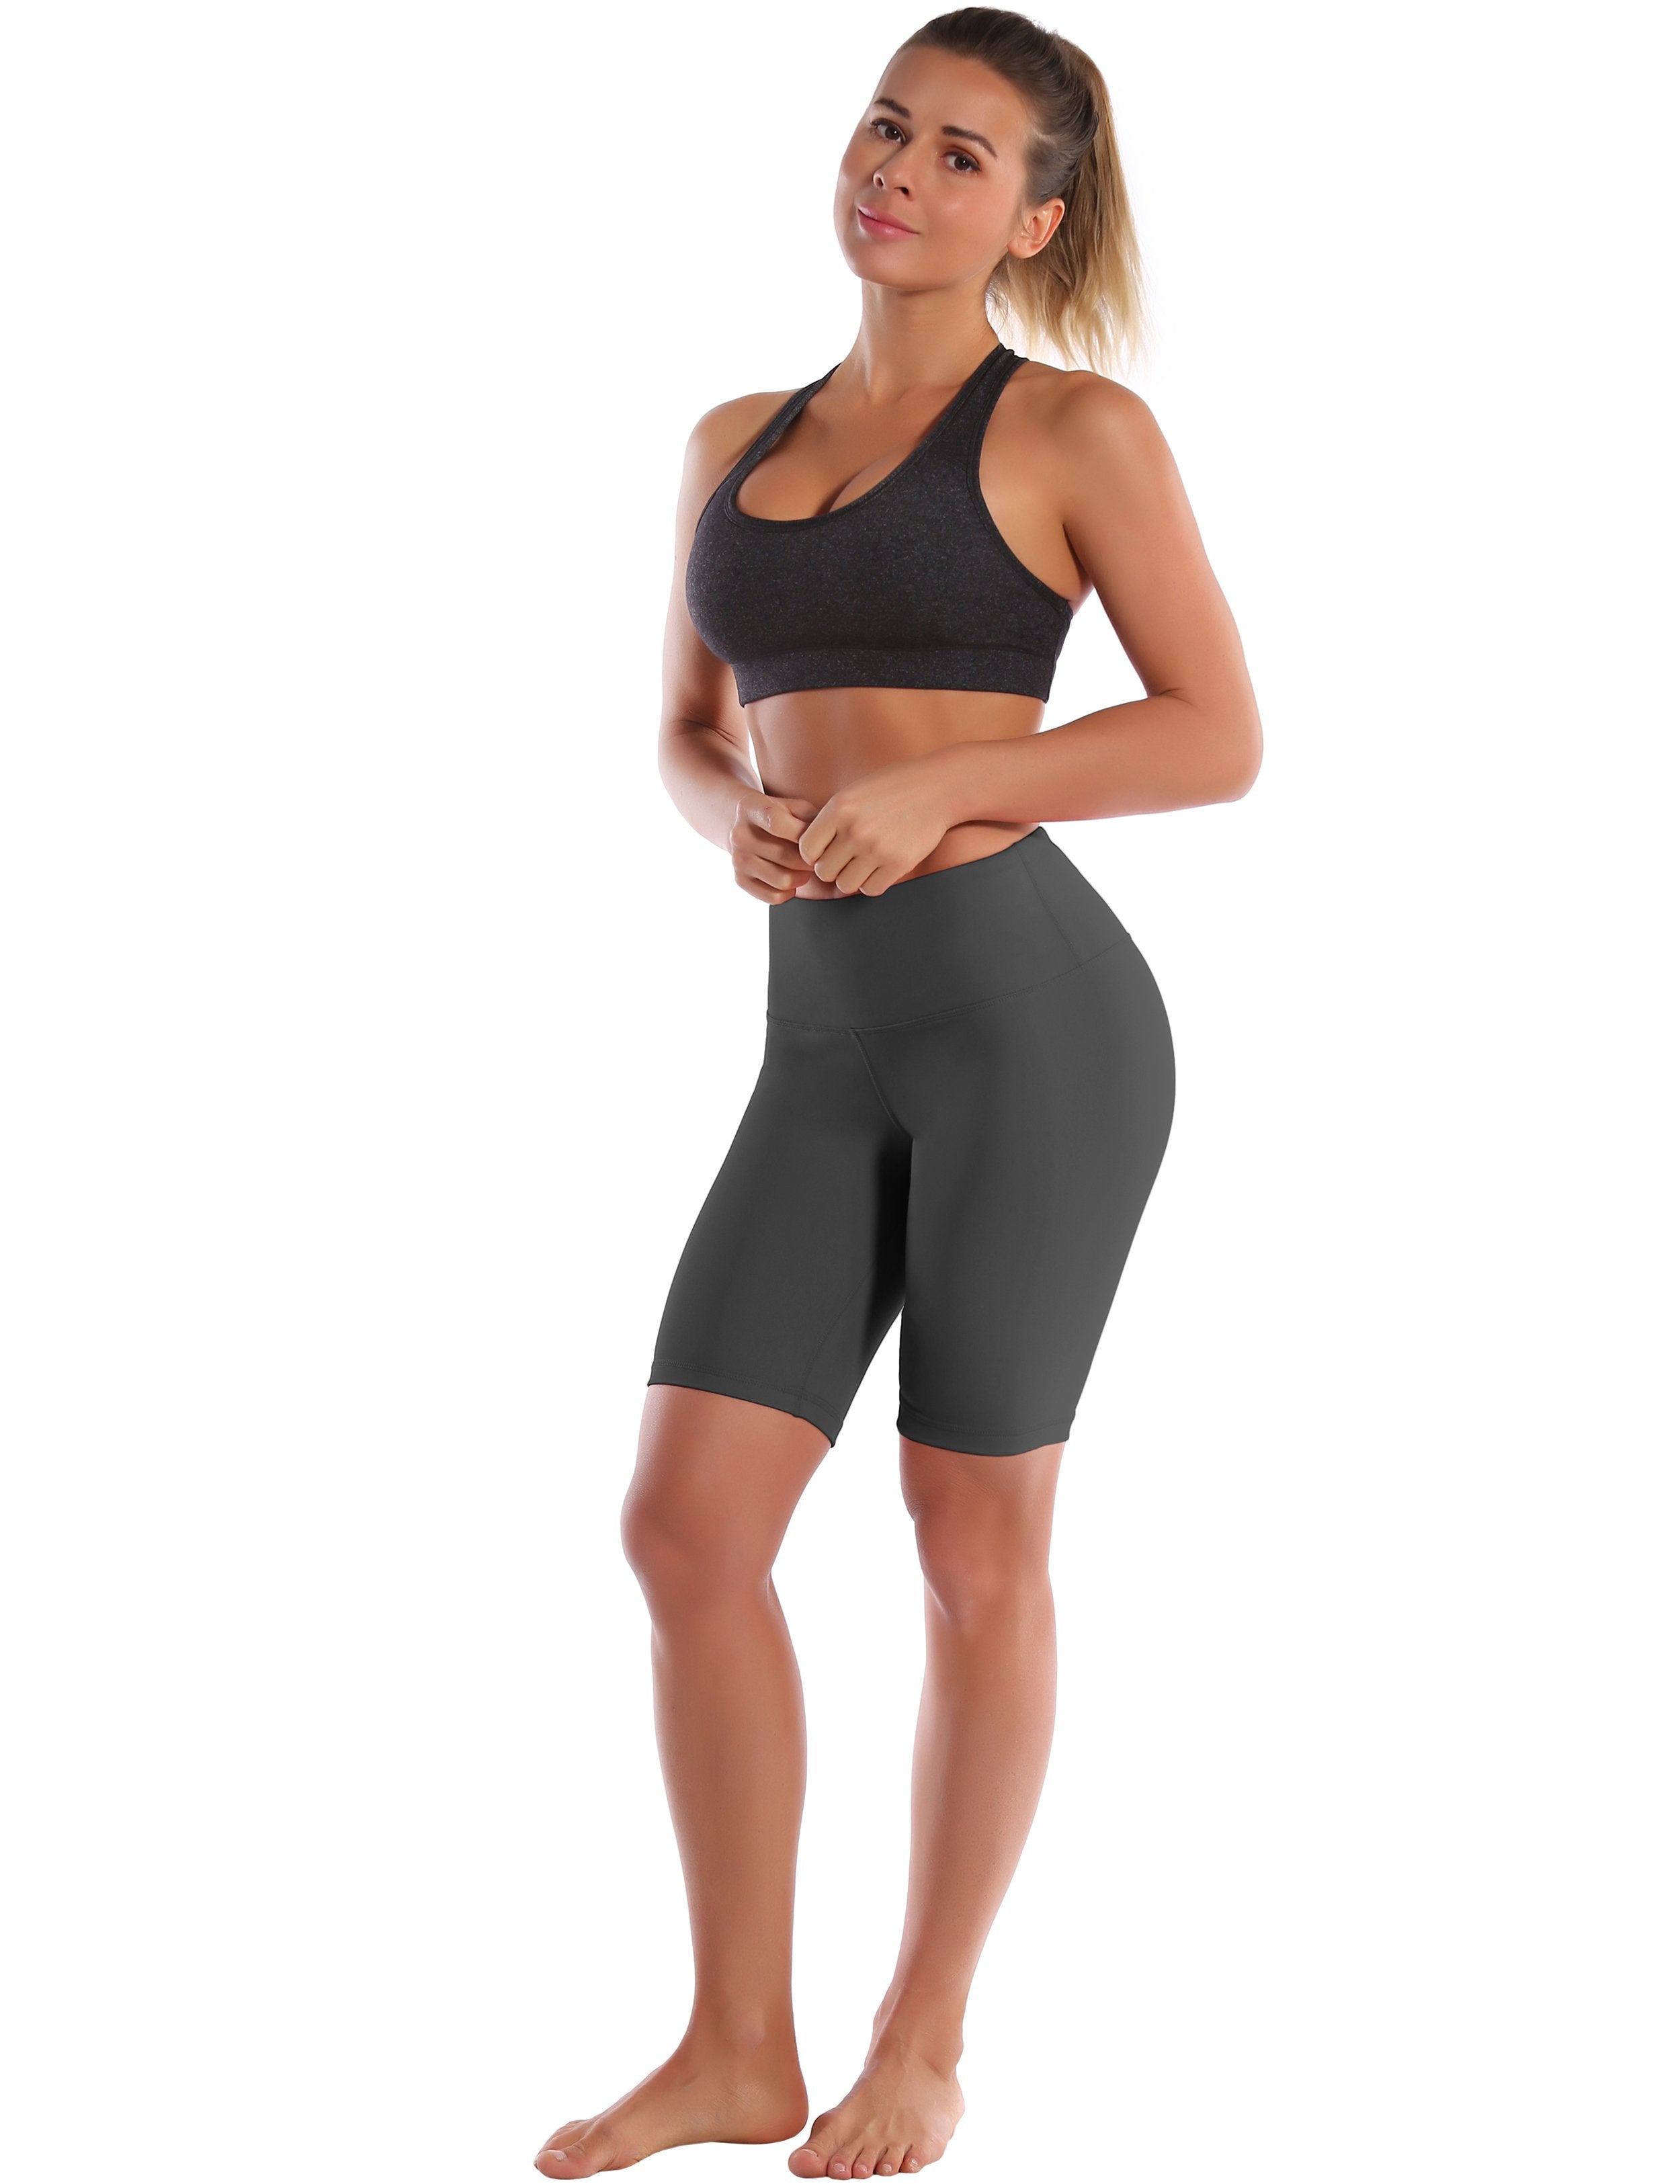 8" High Waist Plus Size Shorts shadowcharcoal Sleek, soft, smooth and totally comfortable: our newest style is here. Softest-ever fabric High elasticity High density 4-way stretch Fabric doesn't attract lint easily No see-through Moisture-wicking Machine wash 75% Nylon, 25% Spandex